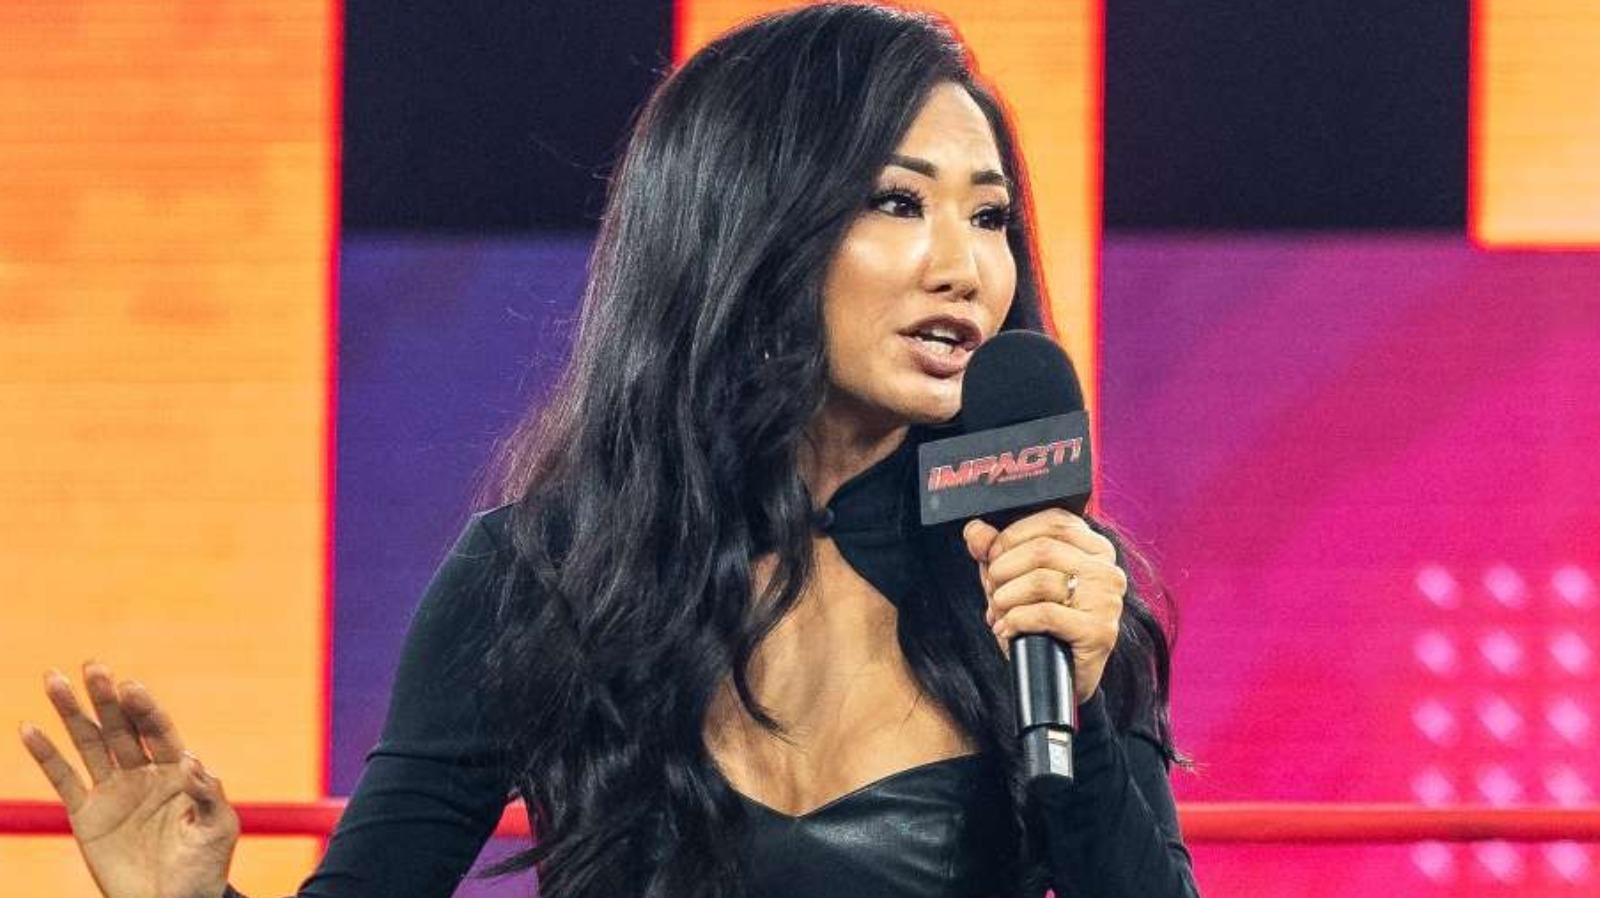 This Wwe Star Inspired Gail Kim To Become A Pro Wrestler